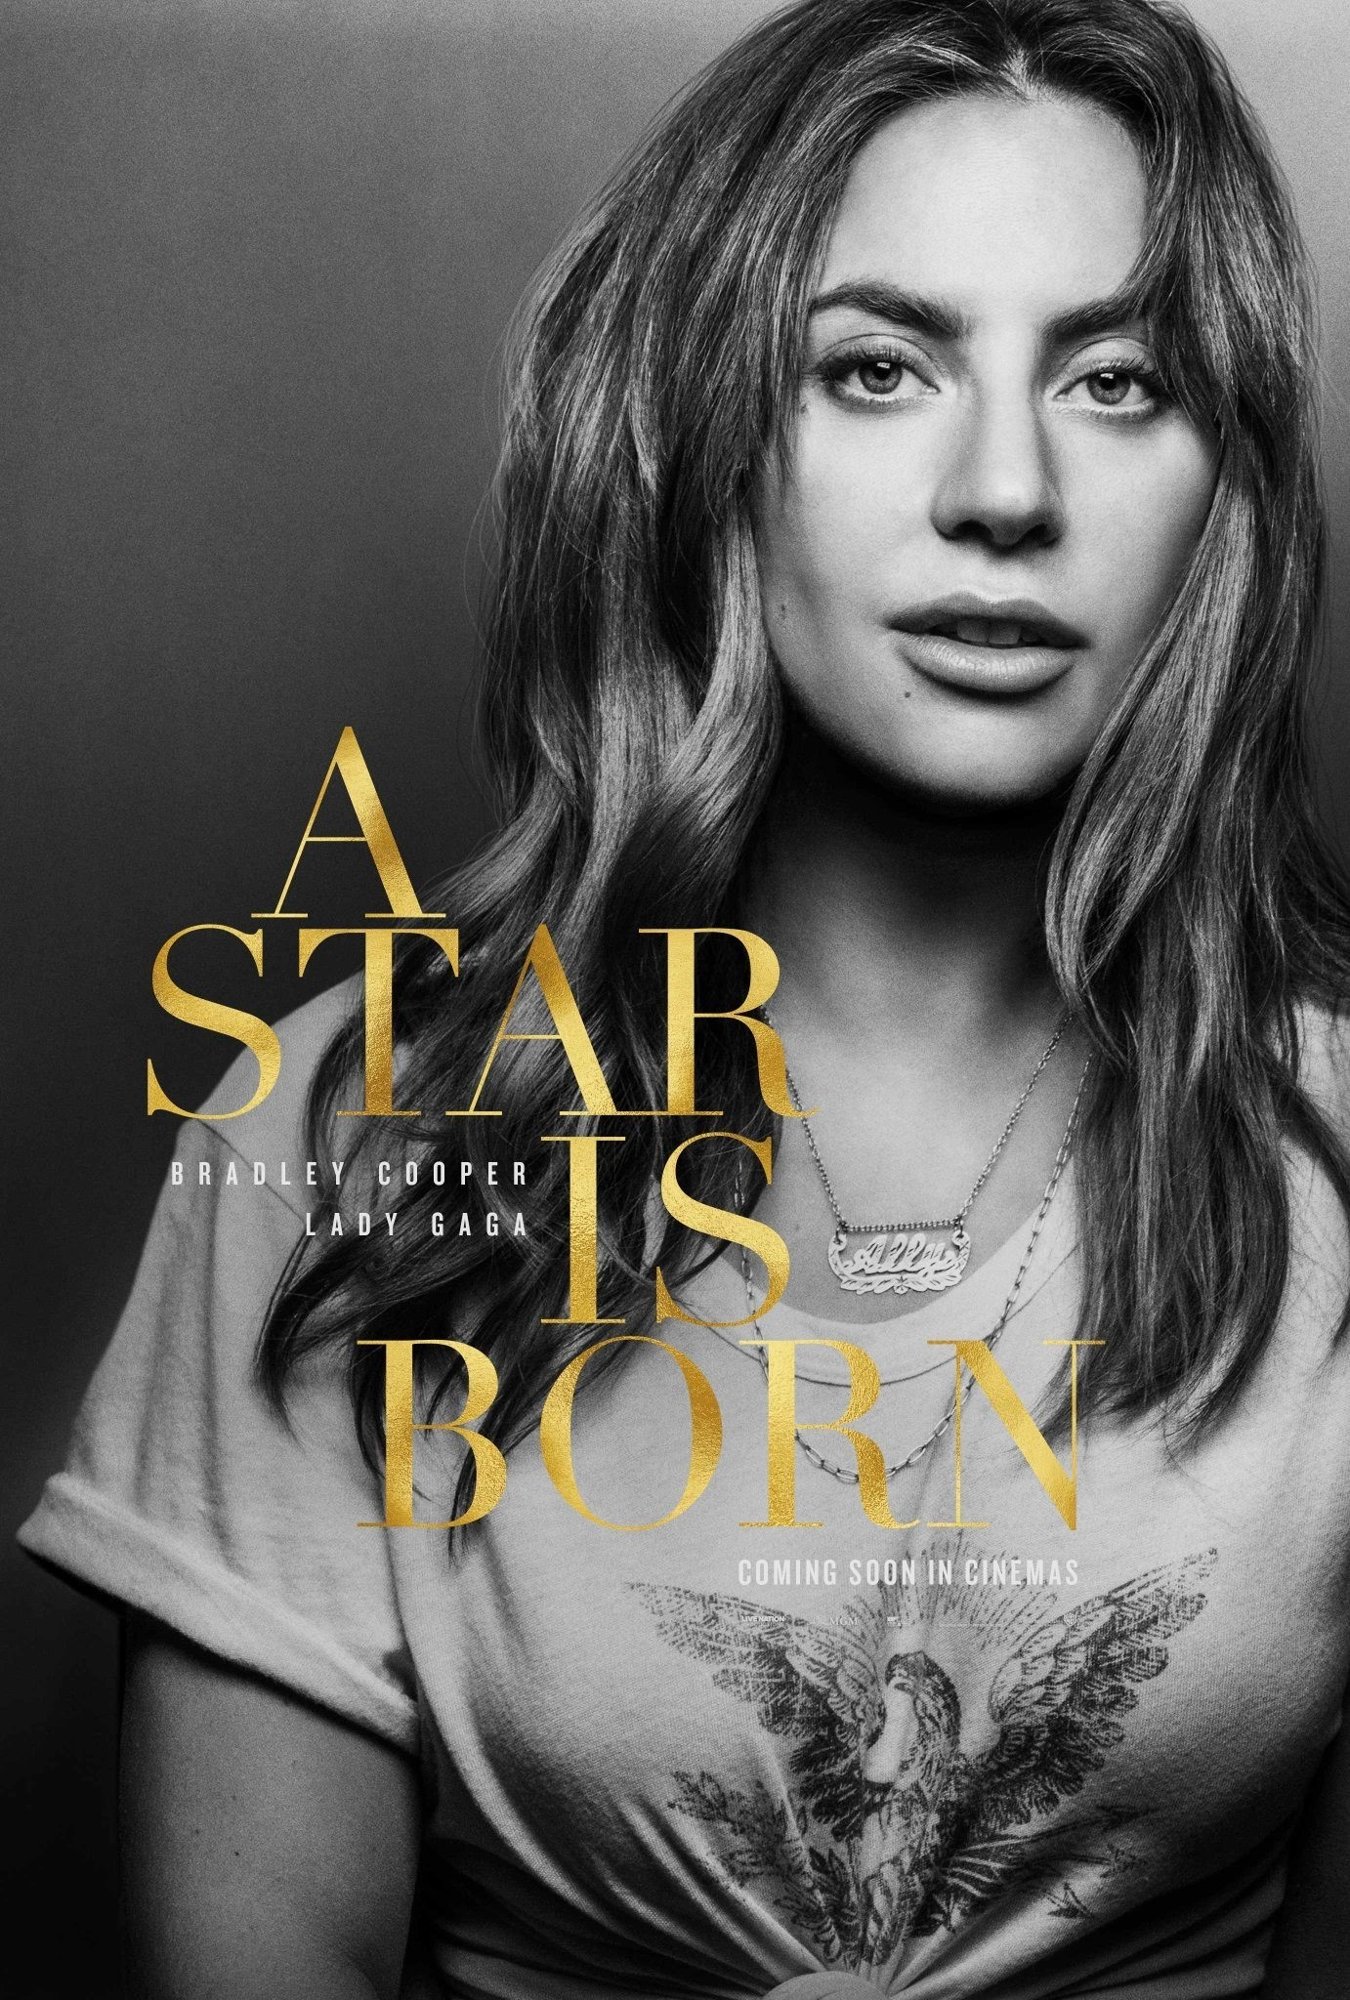 A Star Is Born 2018 Pictures Trailer Reviews News Dvd And Soundtrack